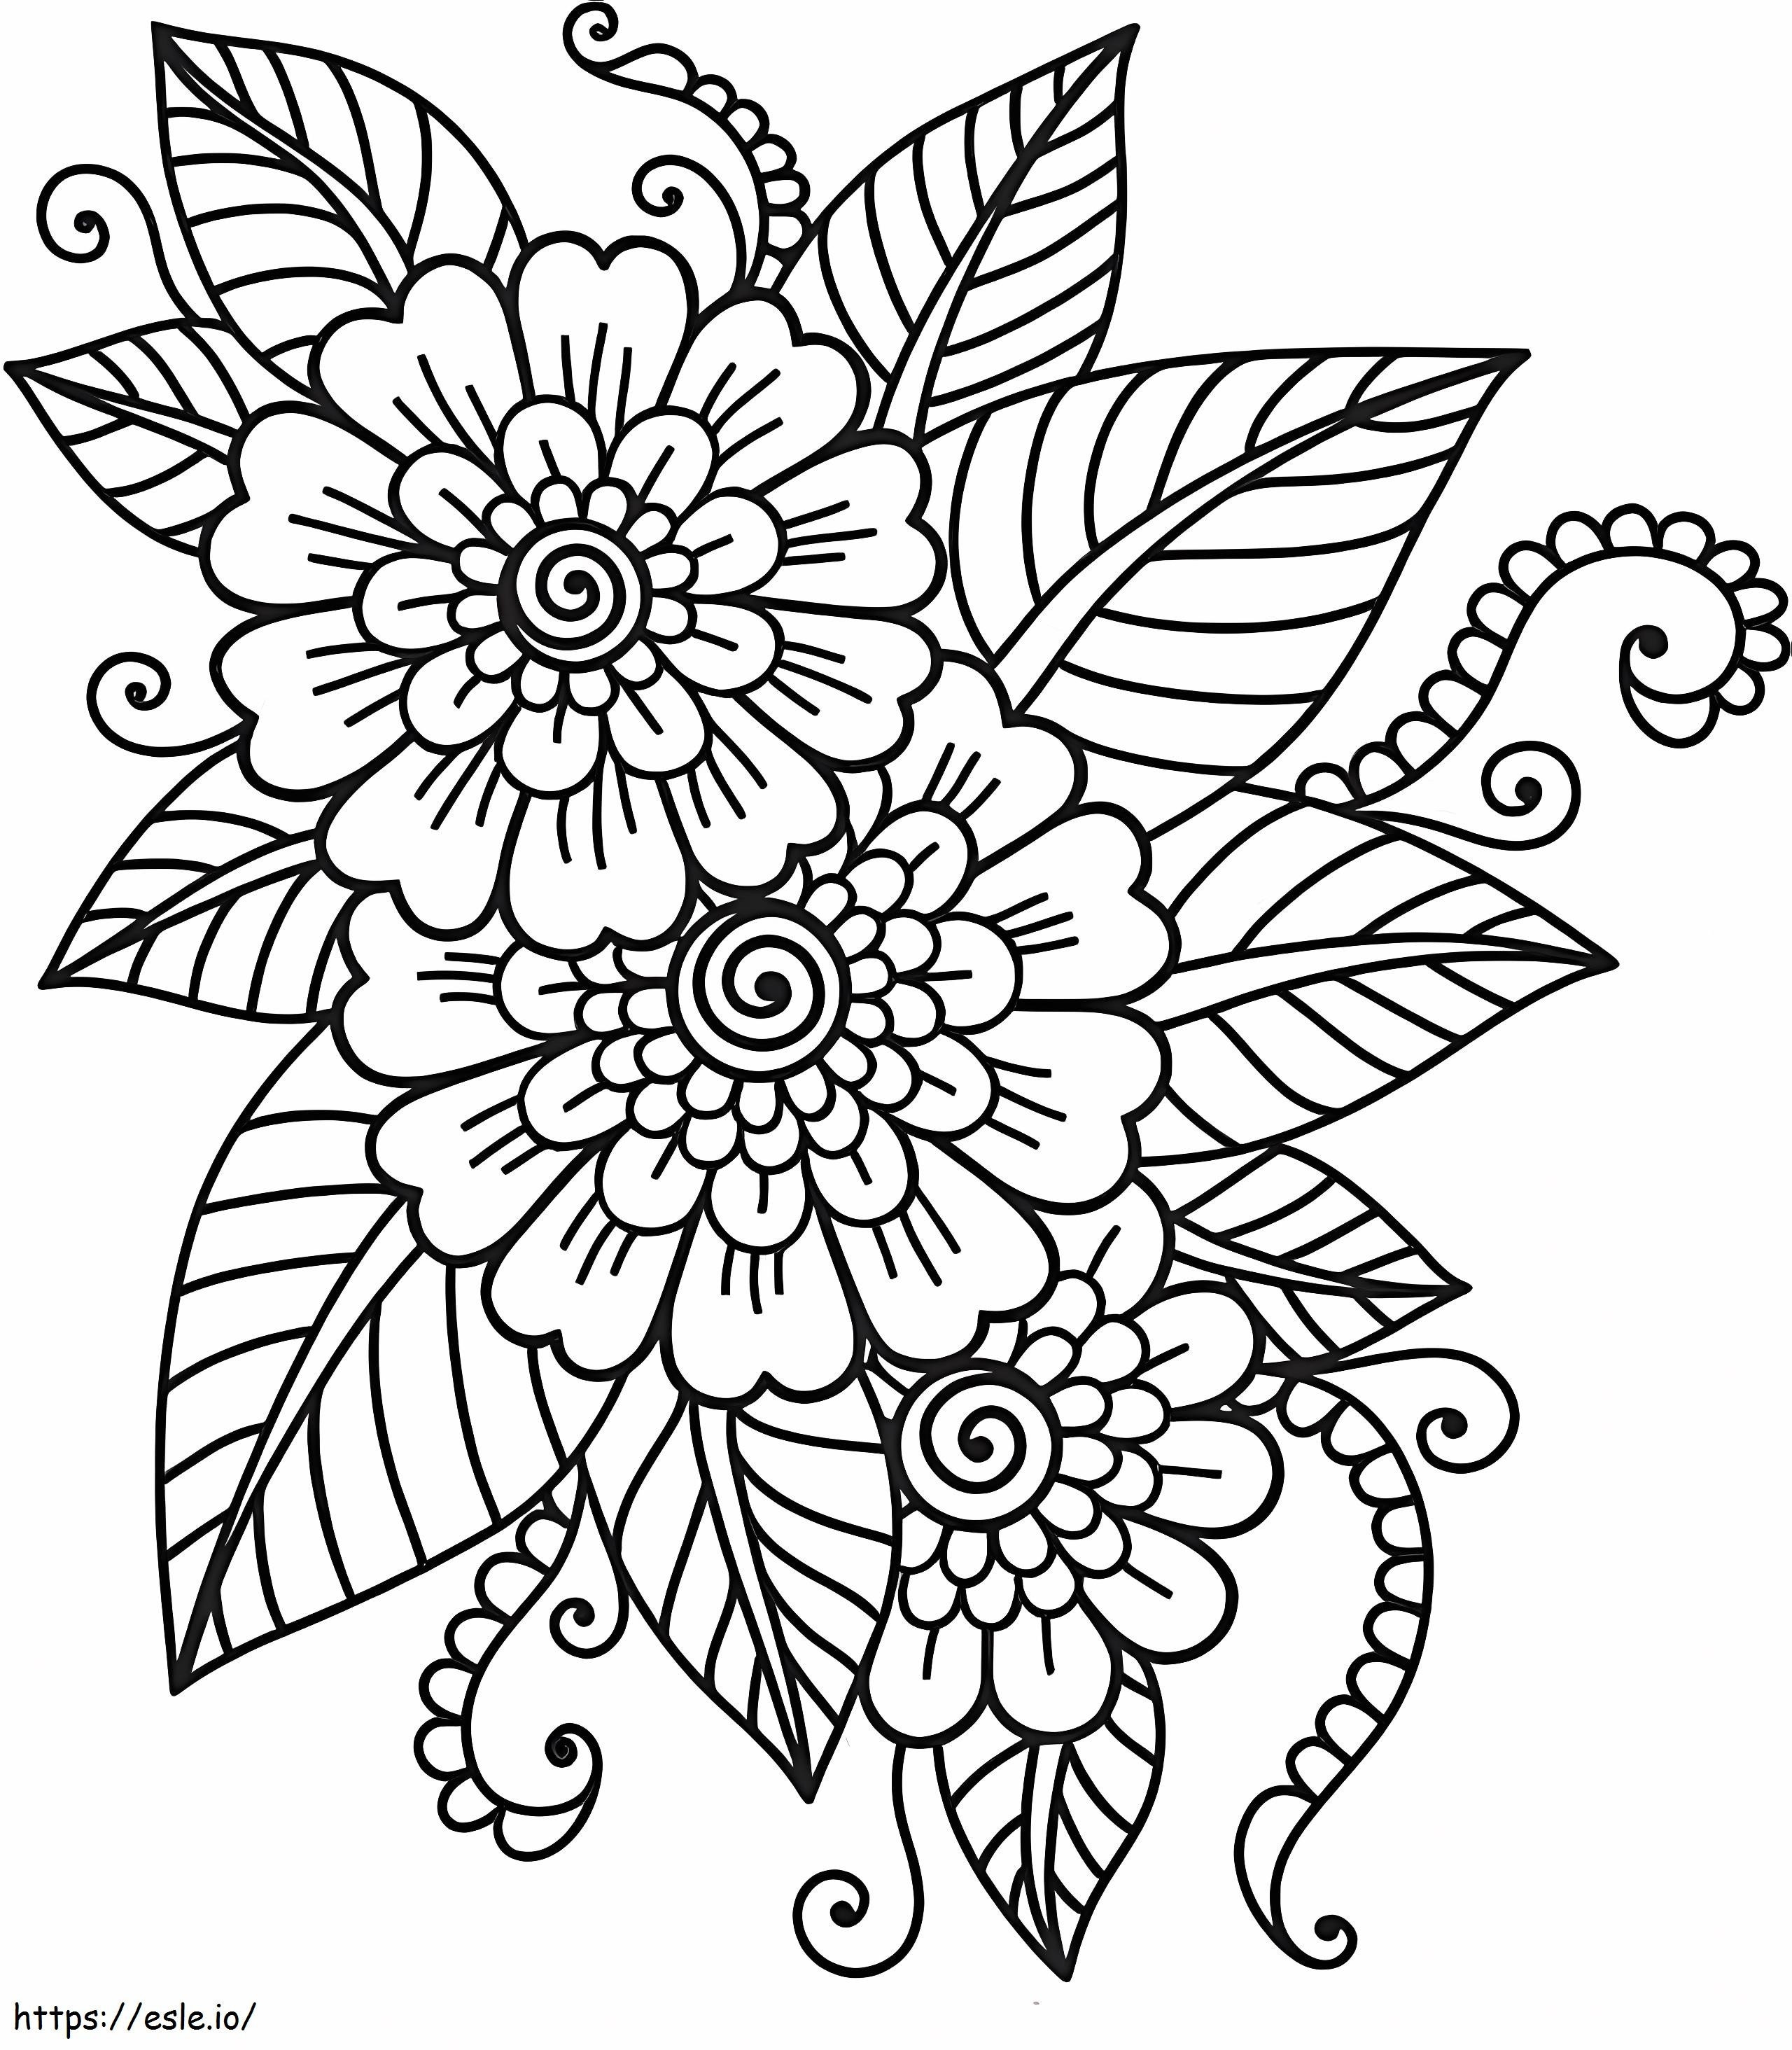 Peach Blossom coloring page